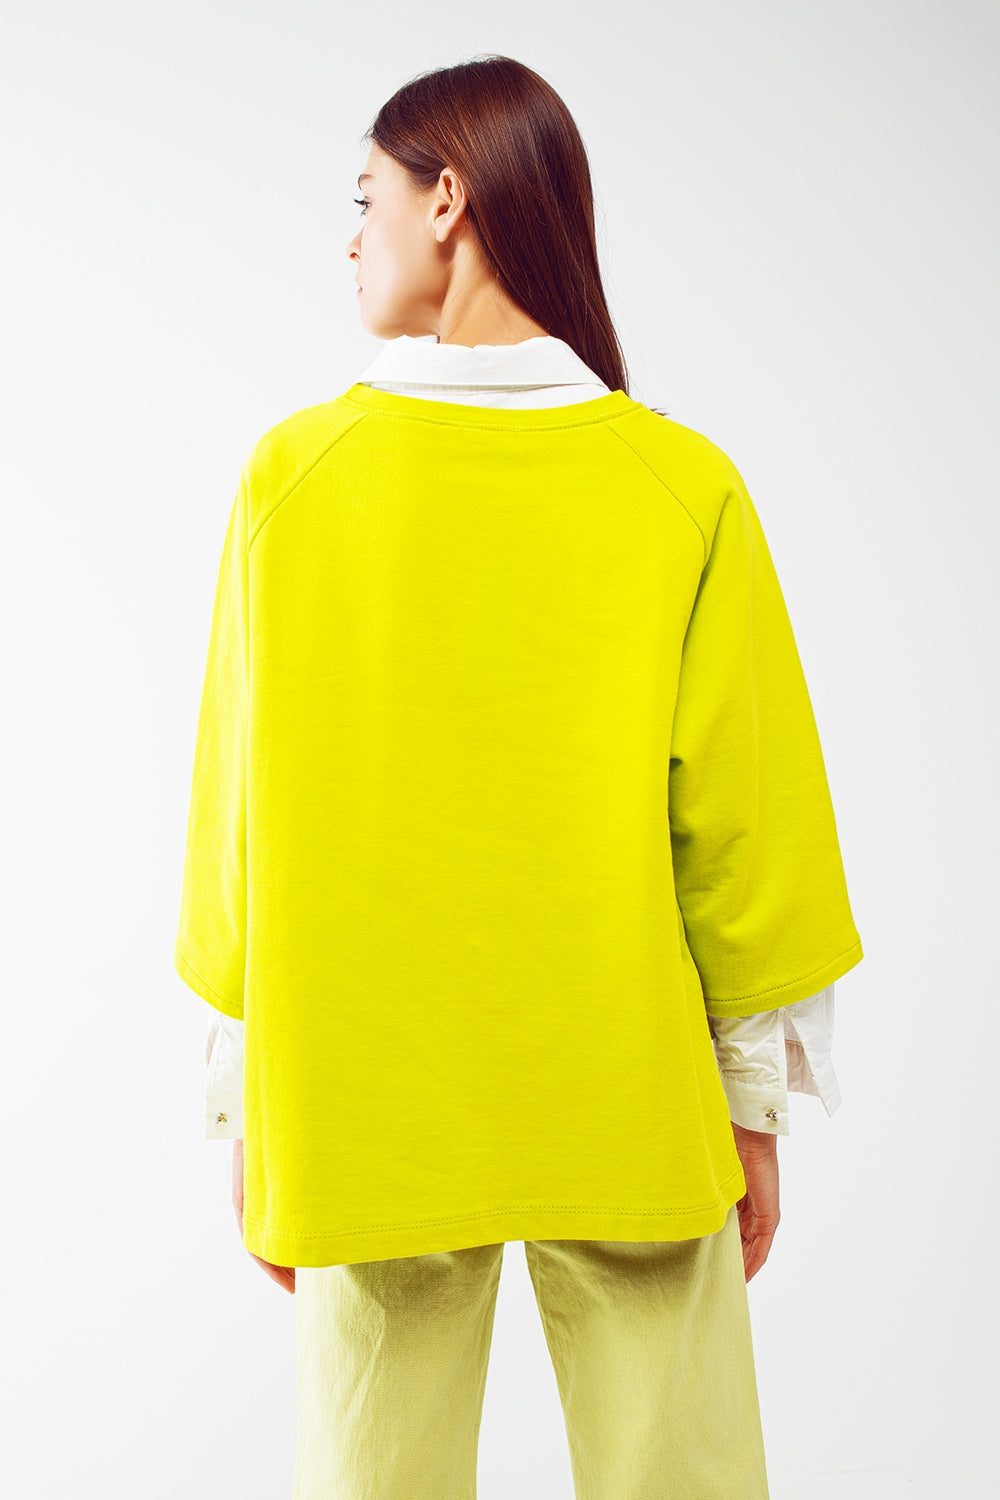 Assymetric sweatshirt with Vintage 18 Text in lime - Szua Store